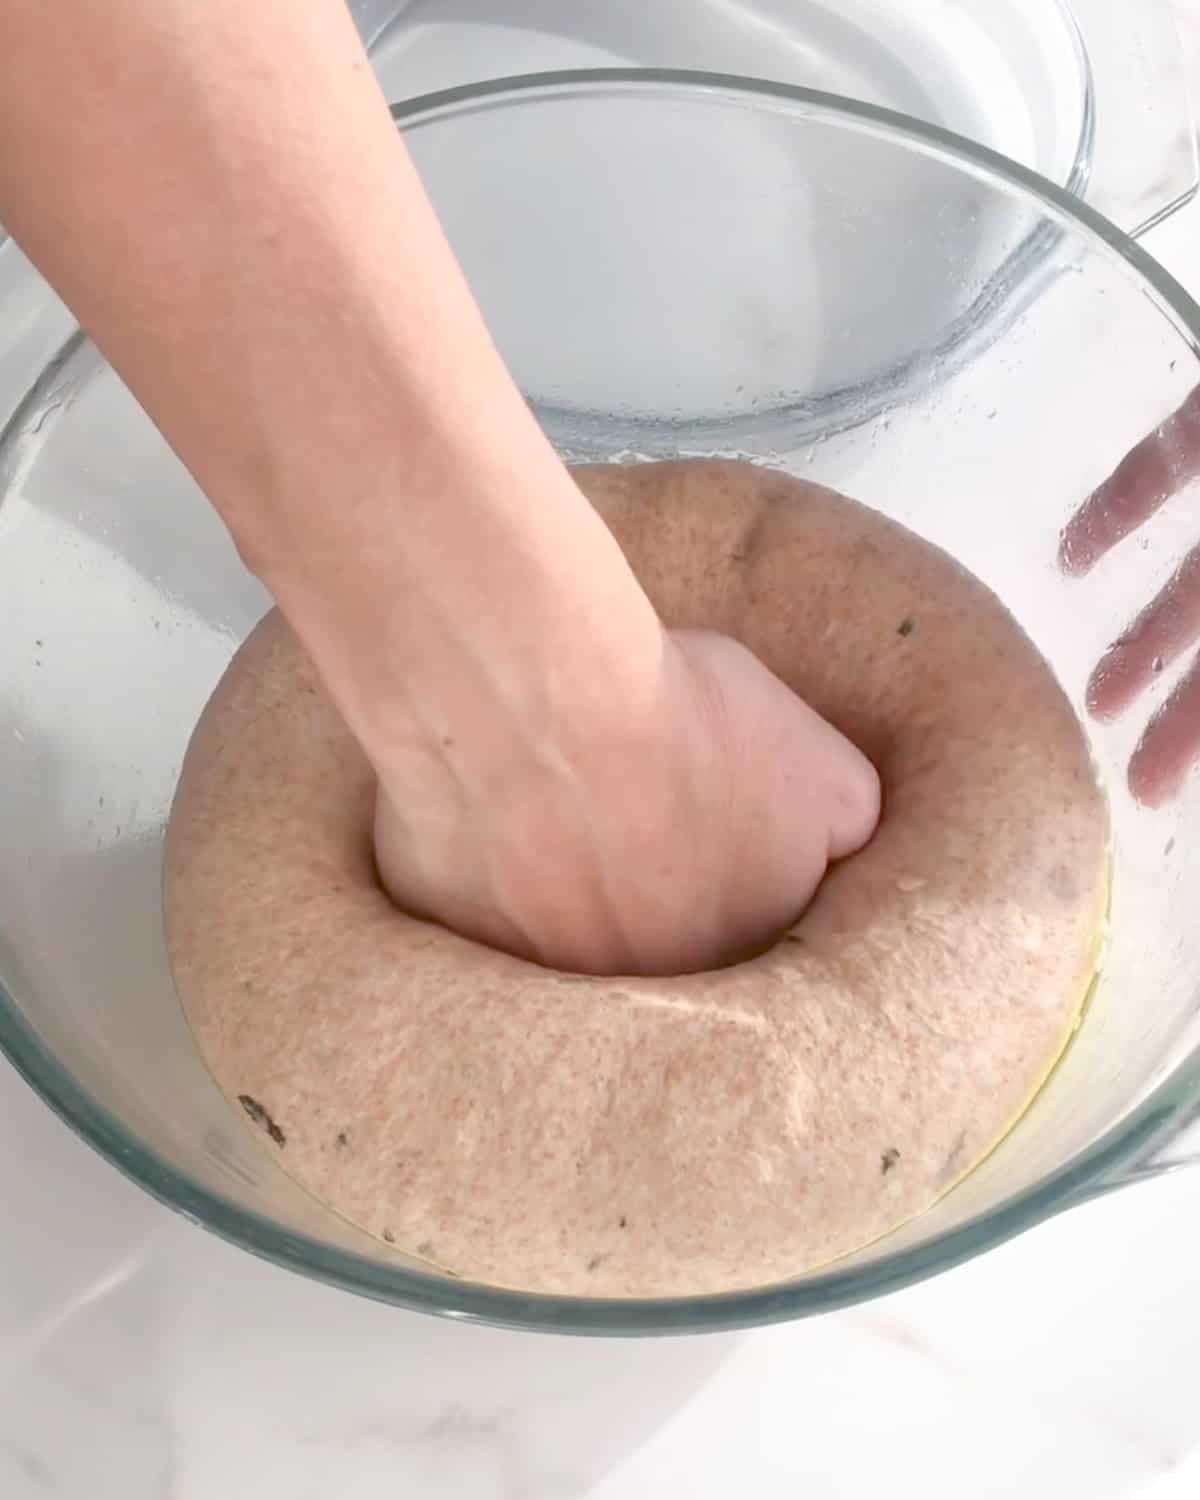 Hand deflating a whole wheat bread dough in a glass bowl on a white surface.